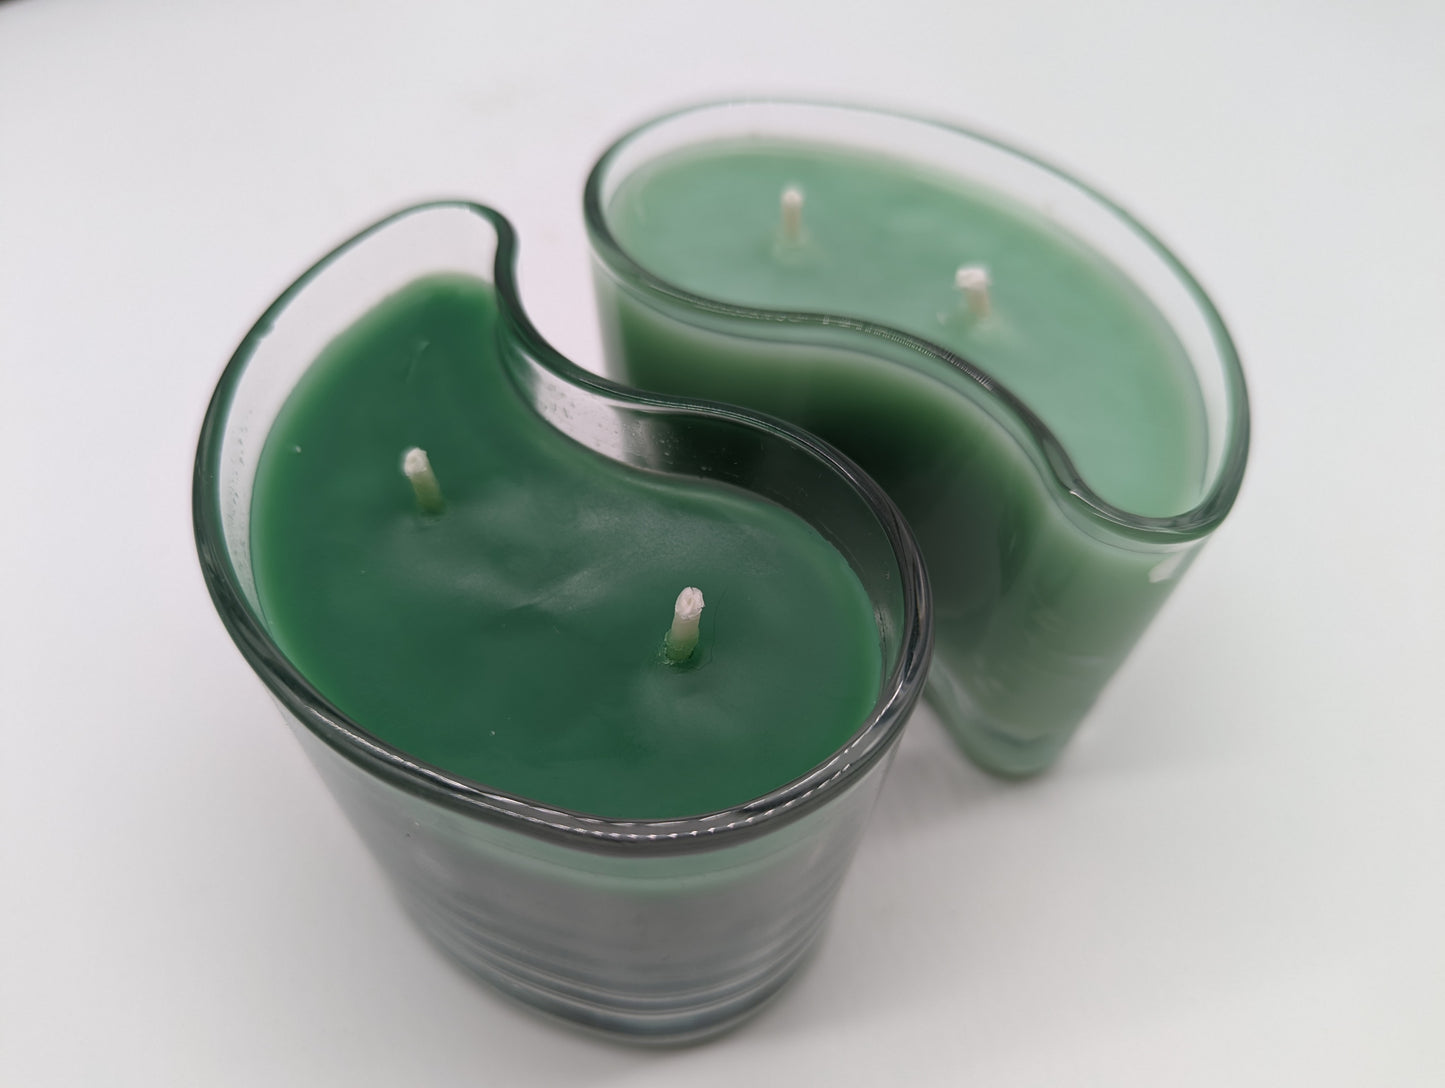 Mountain Evergreen and Balsam Fir DUO Dual Fragrance Candle